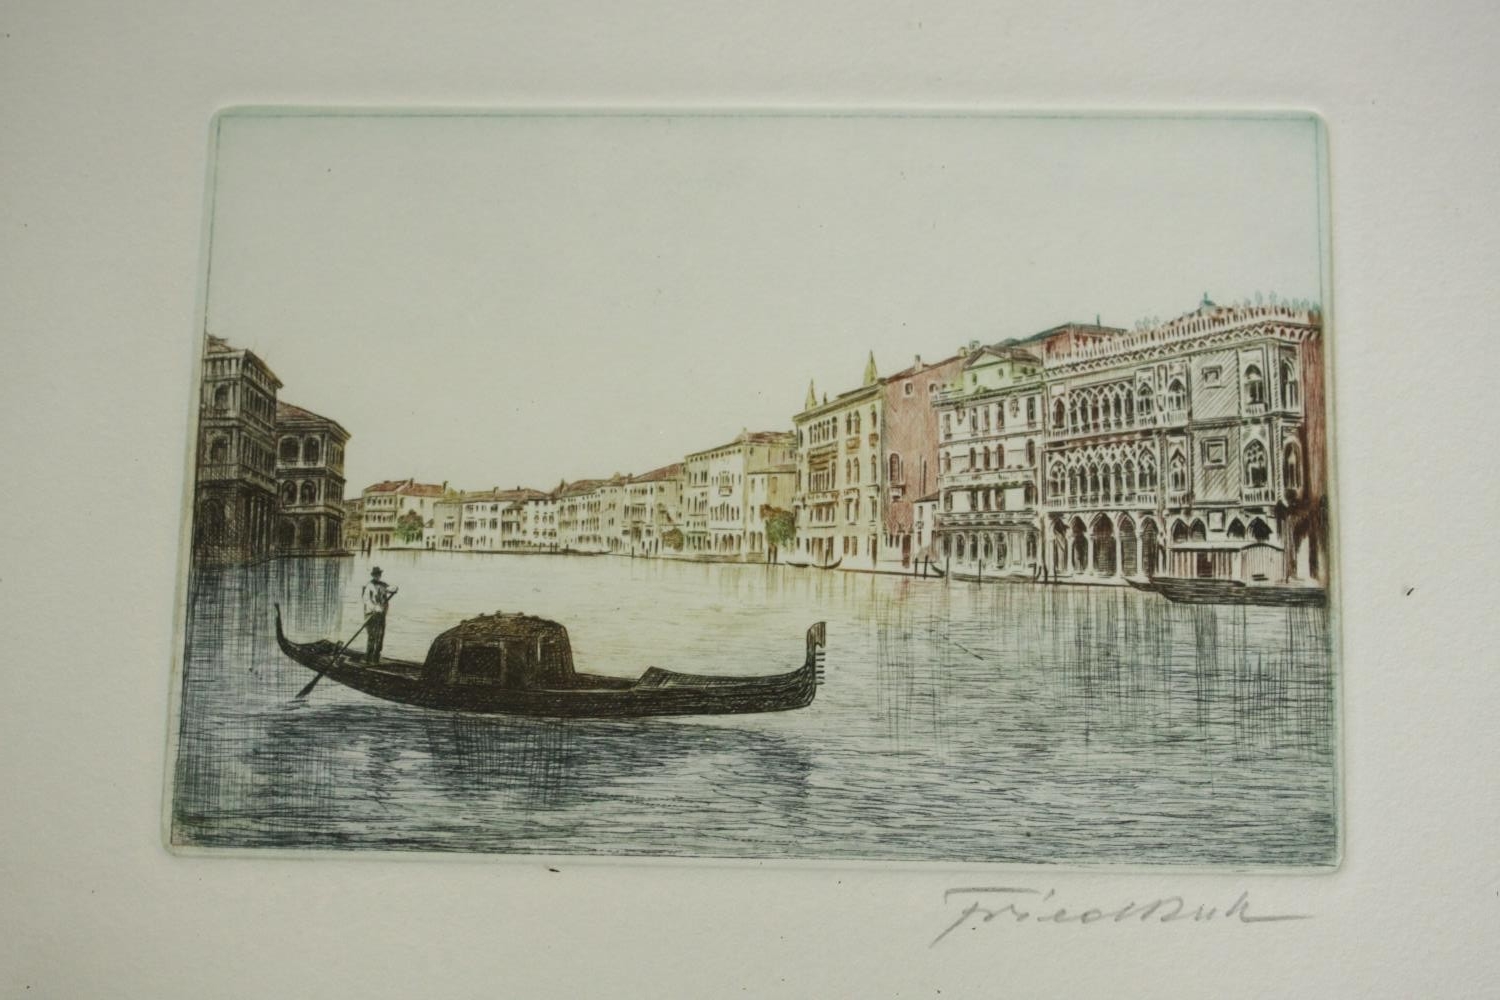 Brian Littlewood (1934-) two hand coloured limited edition etchings of boats (Pride of Baltimore and - Image 5 of 7